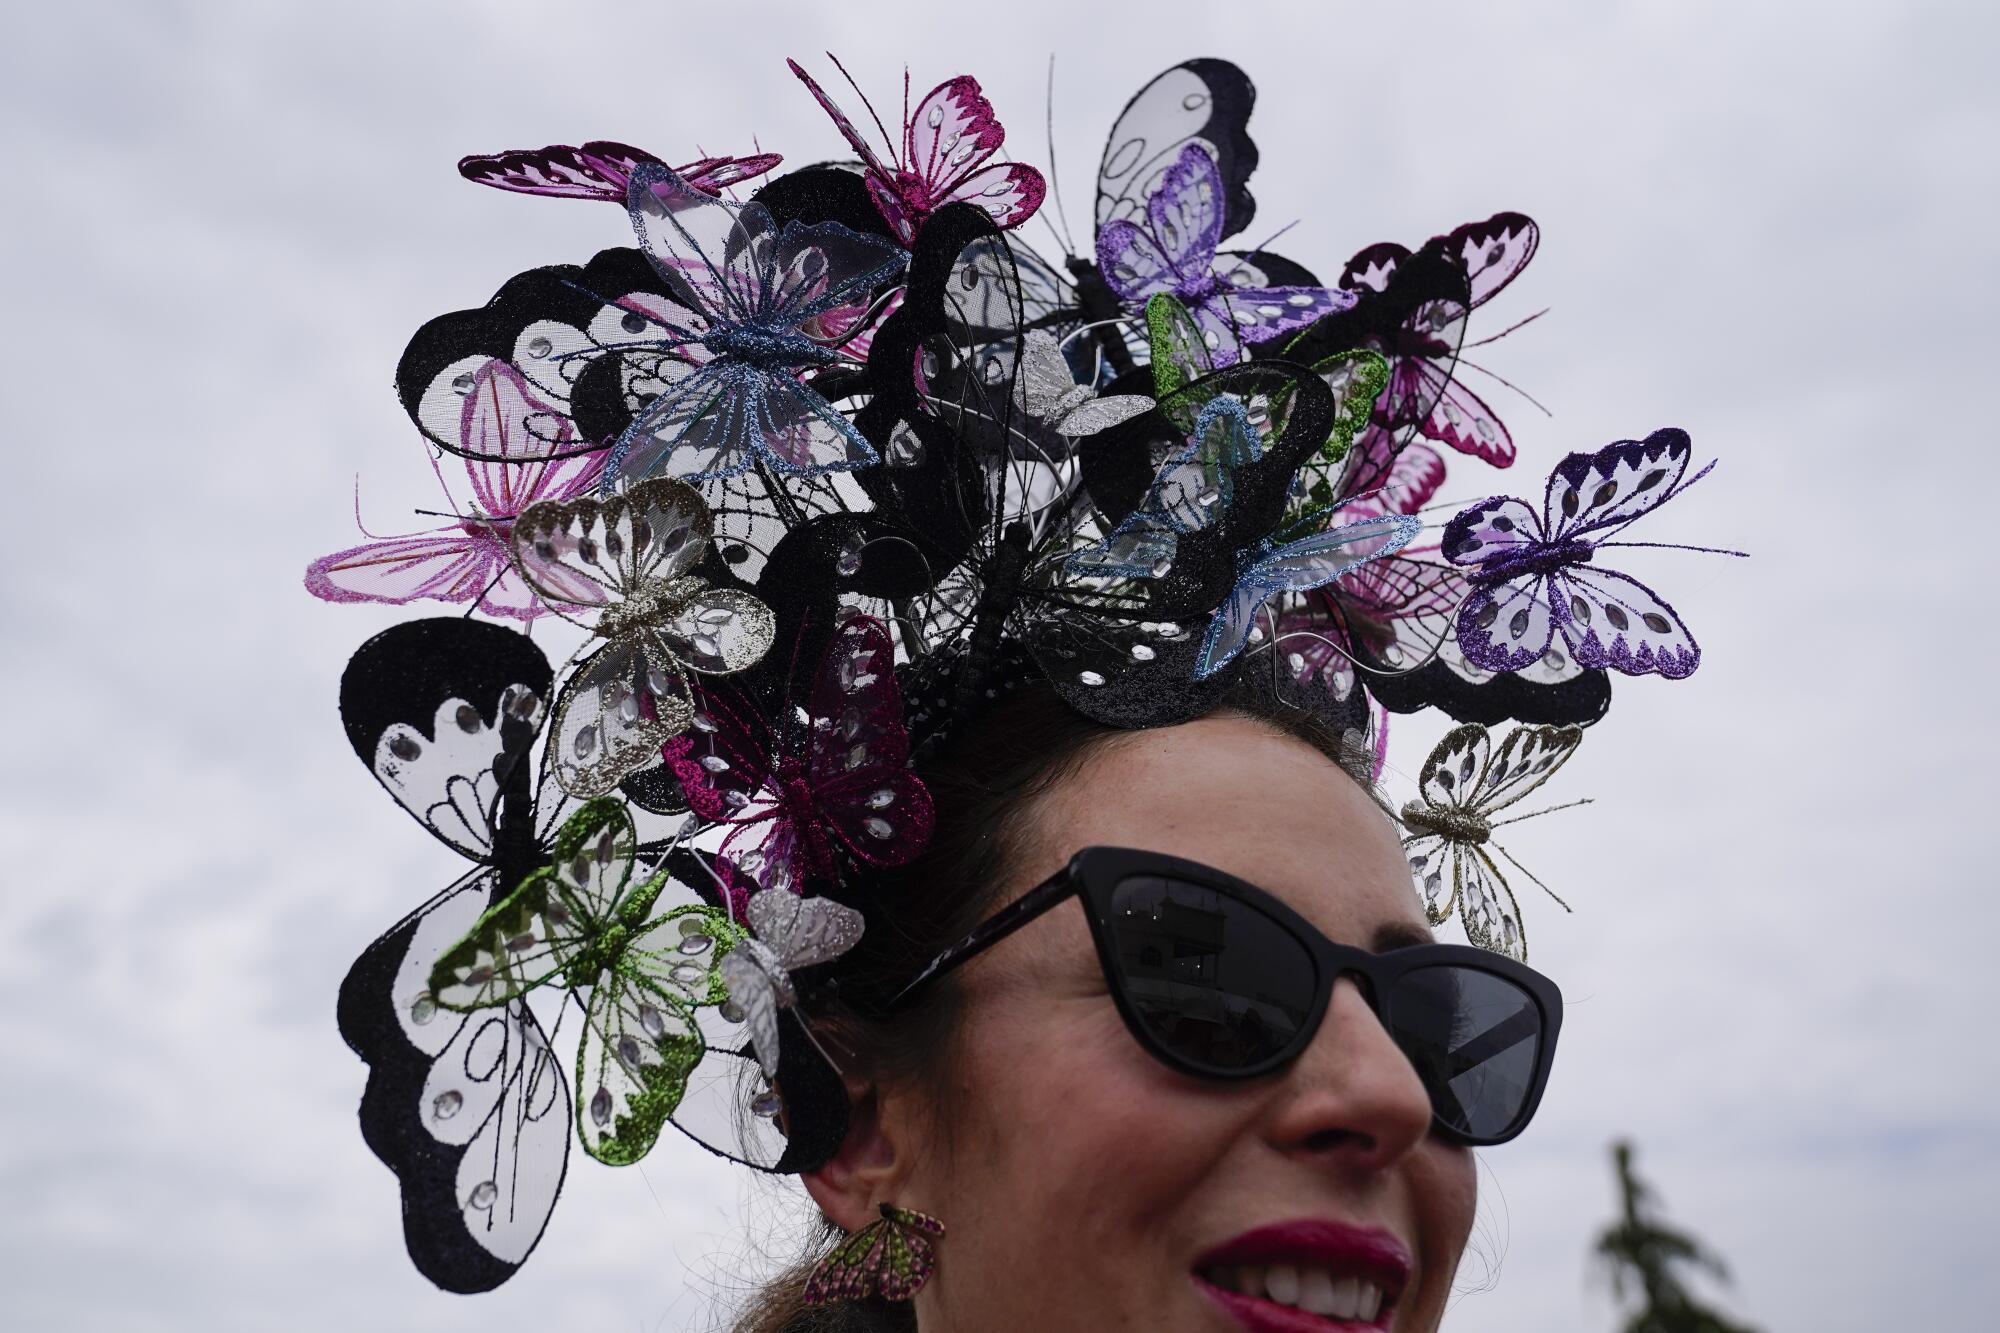 A woman with a hat featuring butterflies walks on the grounds of Churchill Downs on Saturday.